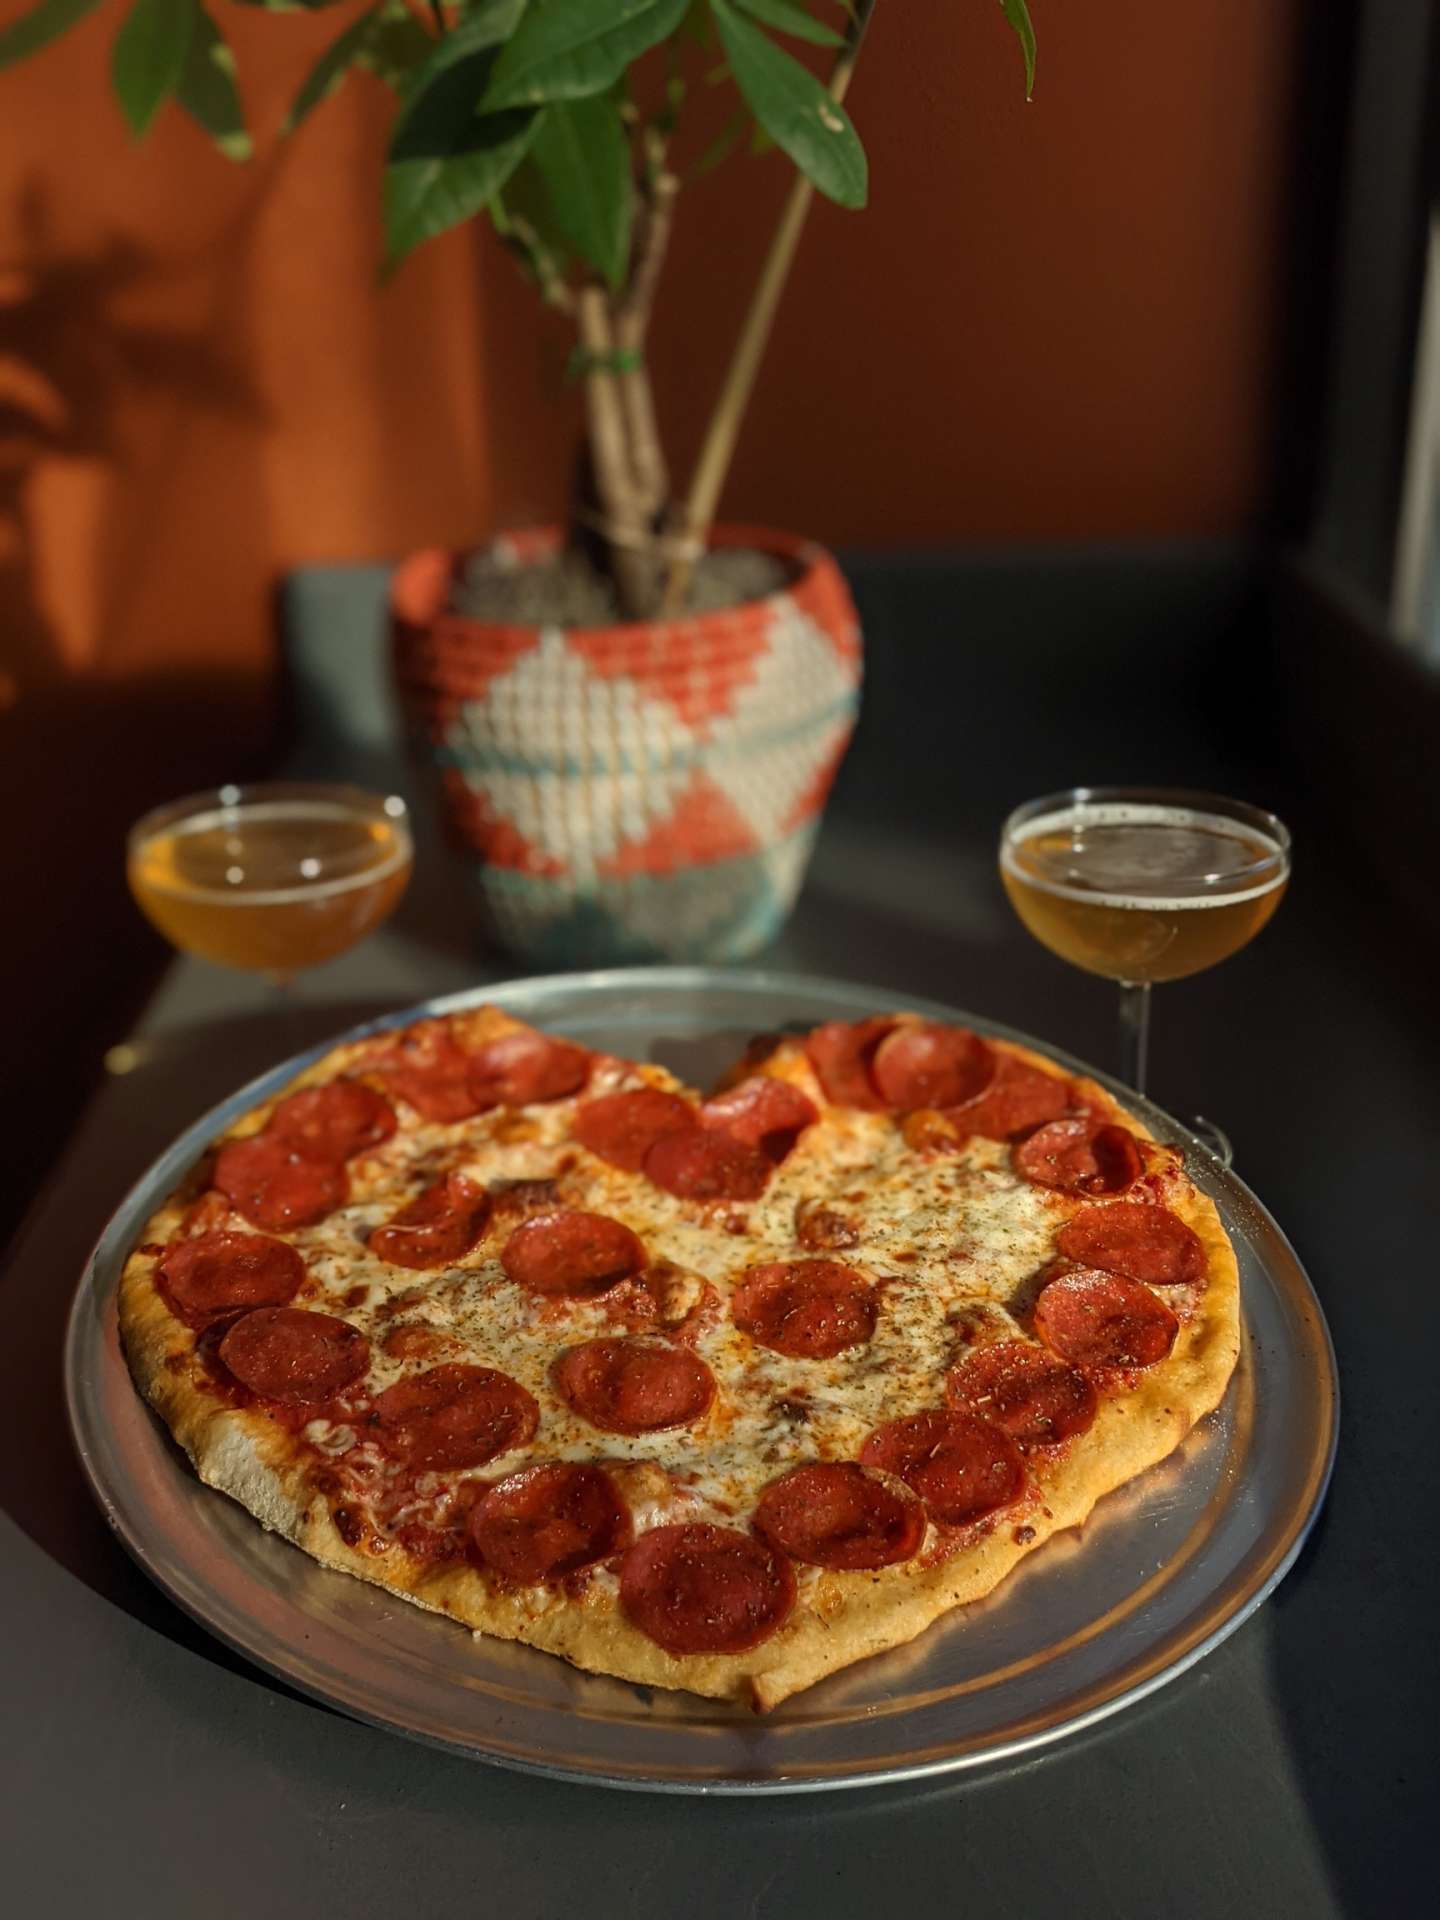 rewired heart pizza for valentine's weekend in chicago